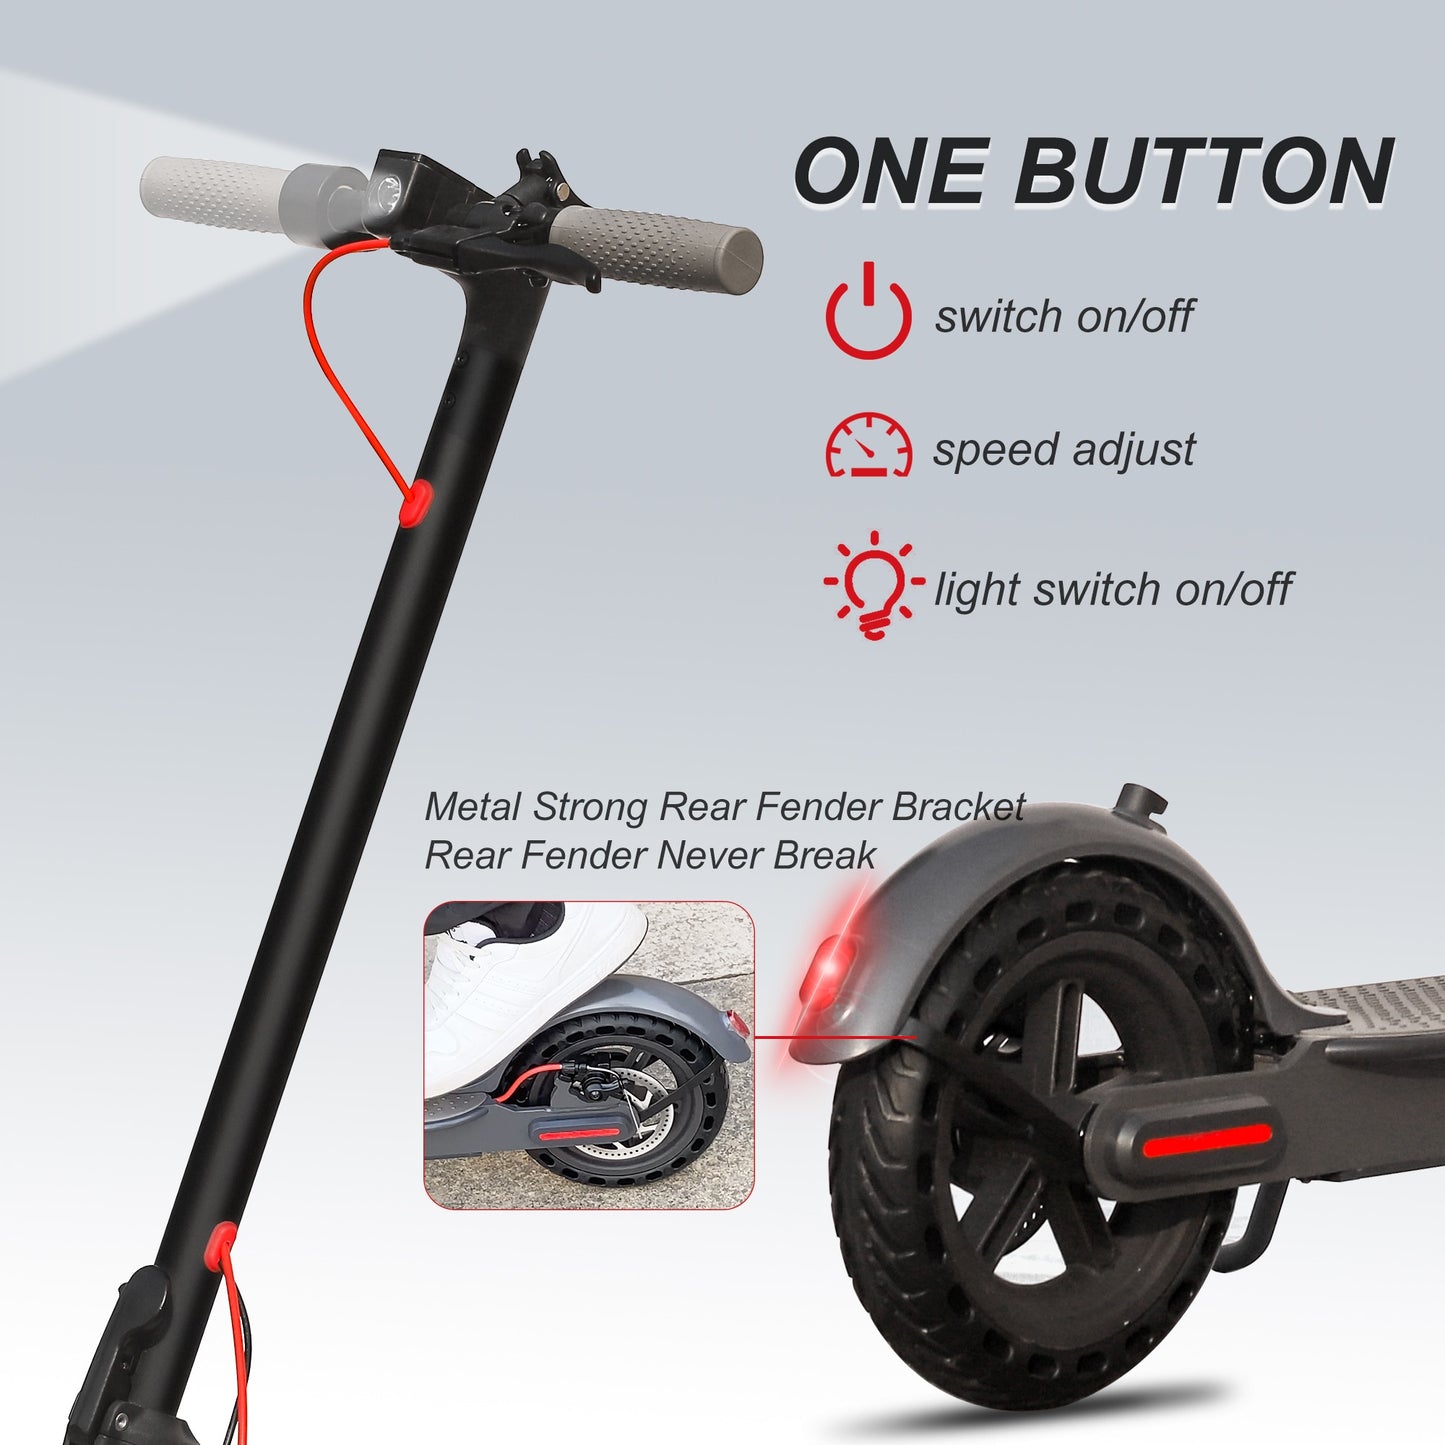 AOVOPRO New Upgraded Electric Scooter 350W 31km/h Adult APP Smart Scooter Shock-absorbing Anti-skid Folding Electric Scooter